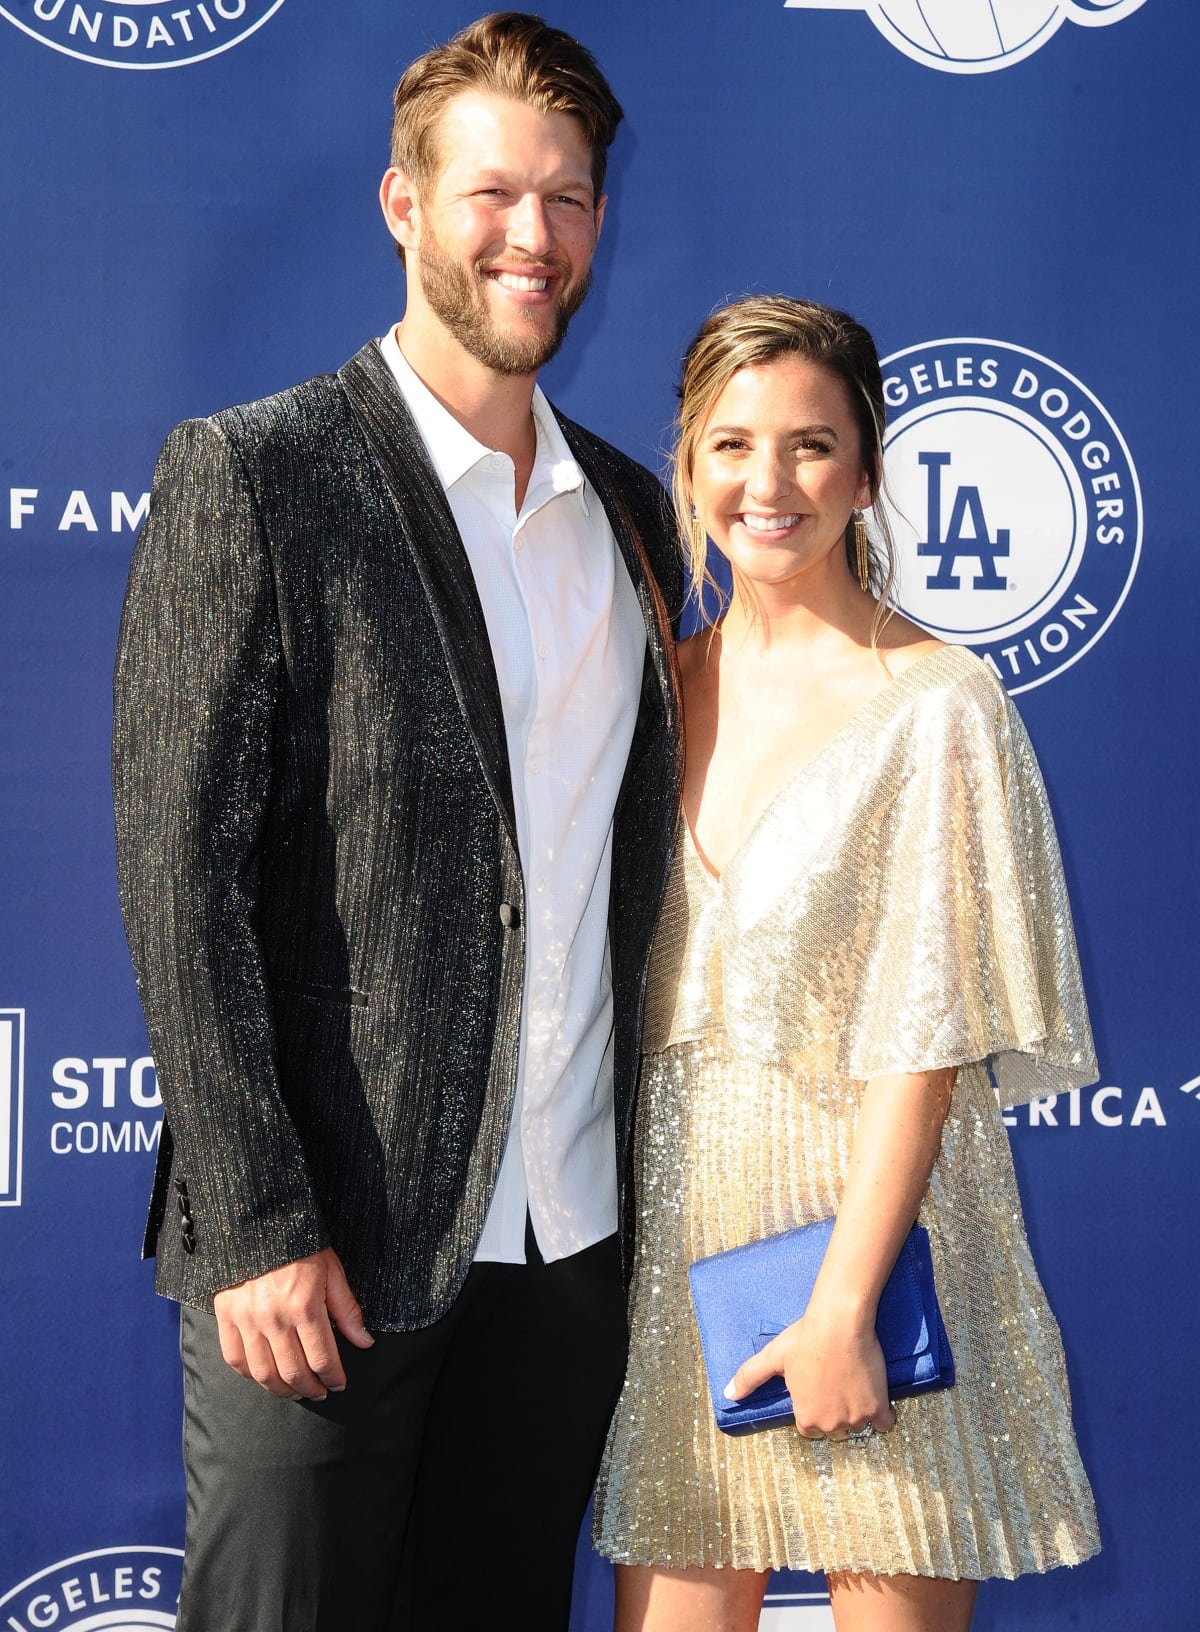 Clayton and Ellen Kershaw both share a passion for philanthropy and humanitarian work